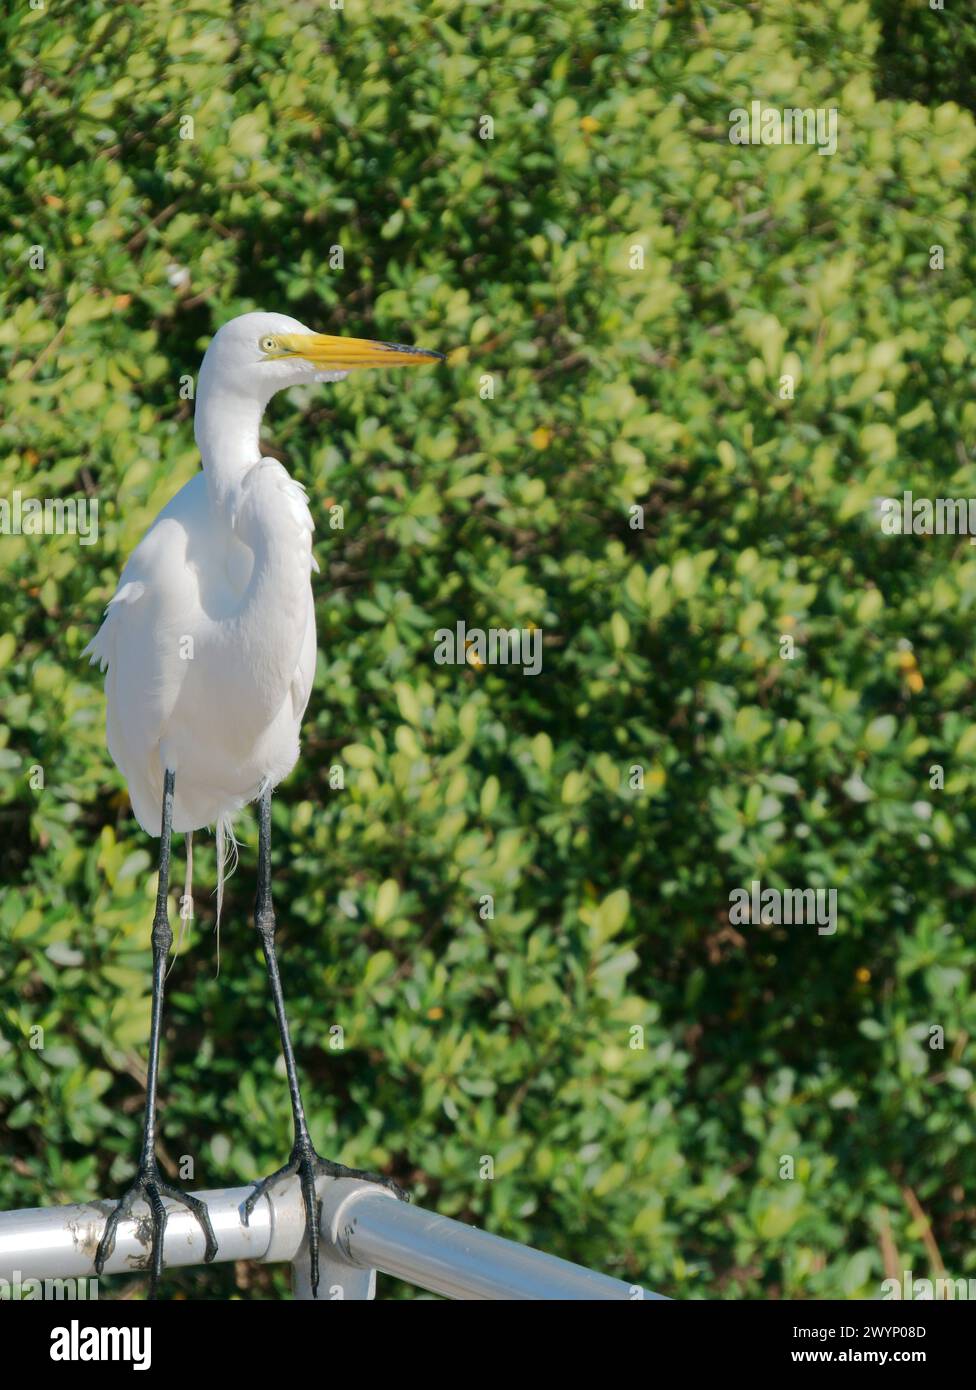 Vertical view White egret curved neck perched on metal rail looking right at Jungle Prada Park. Green bushes in the background. In St. Petersburg, FL Stock Photo